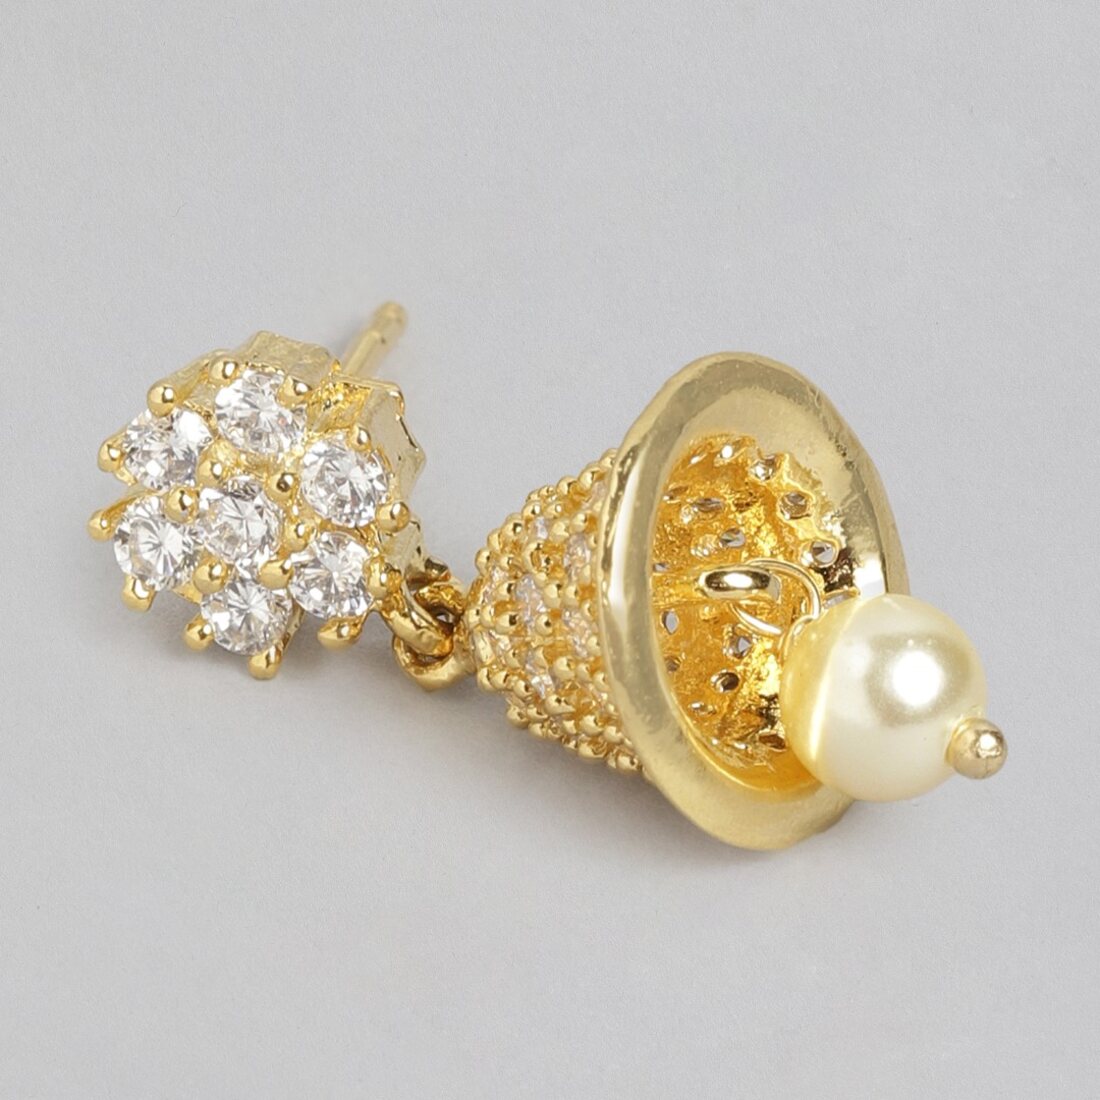 Gilded Opulence Gold Plated Drop Earrings with Cubic Zirconia and Pearls